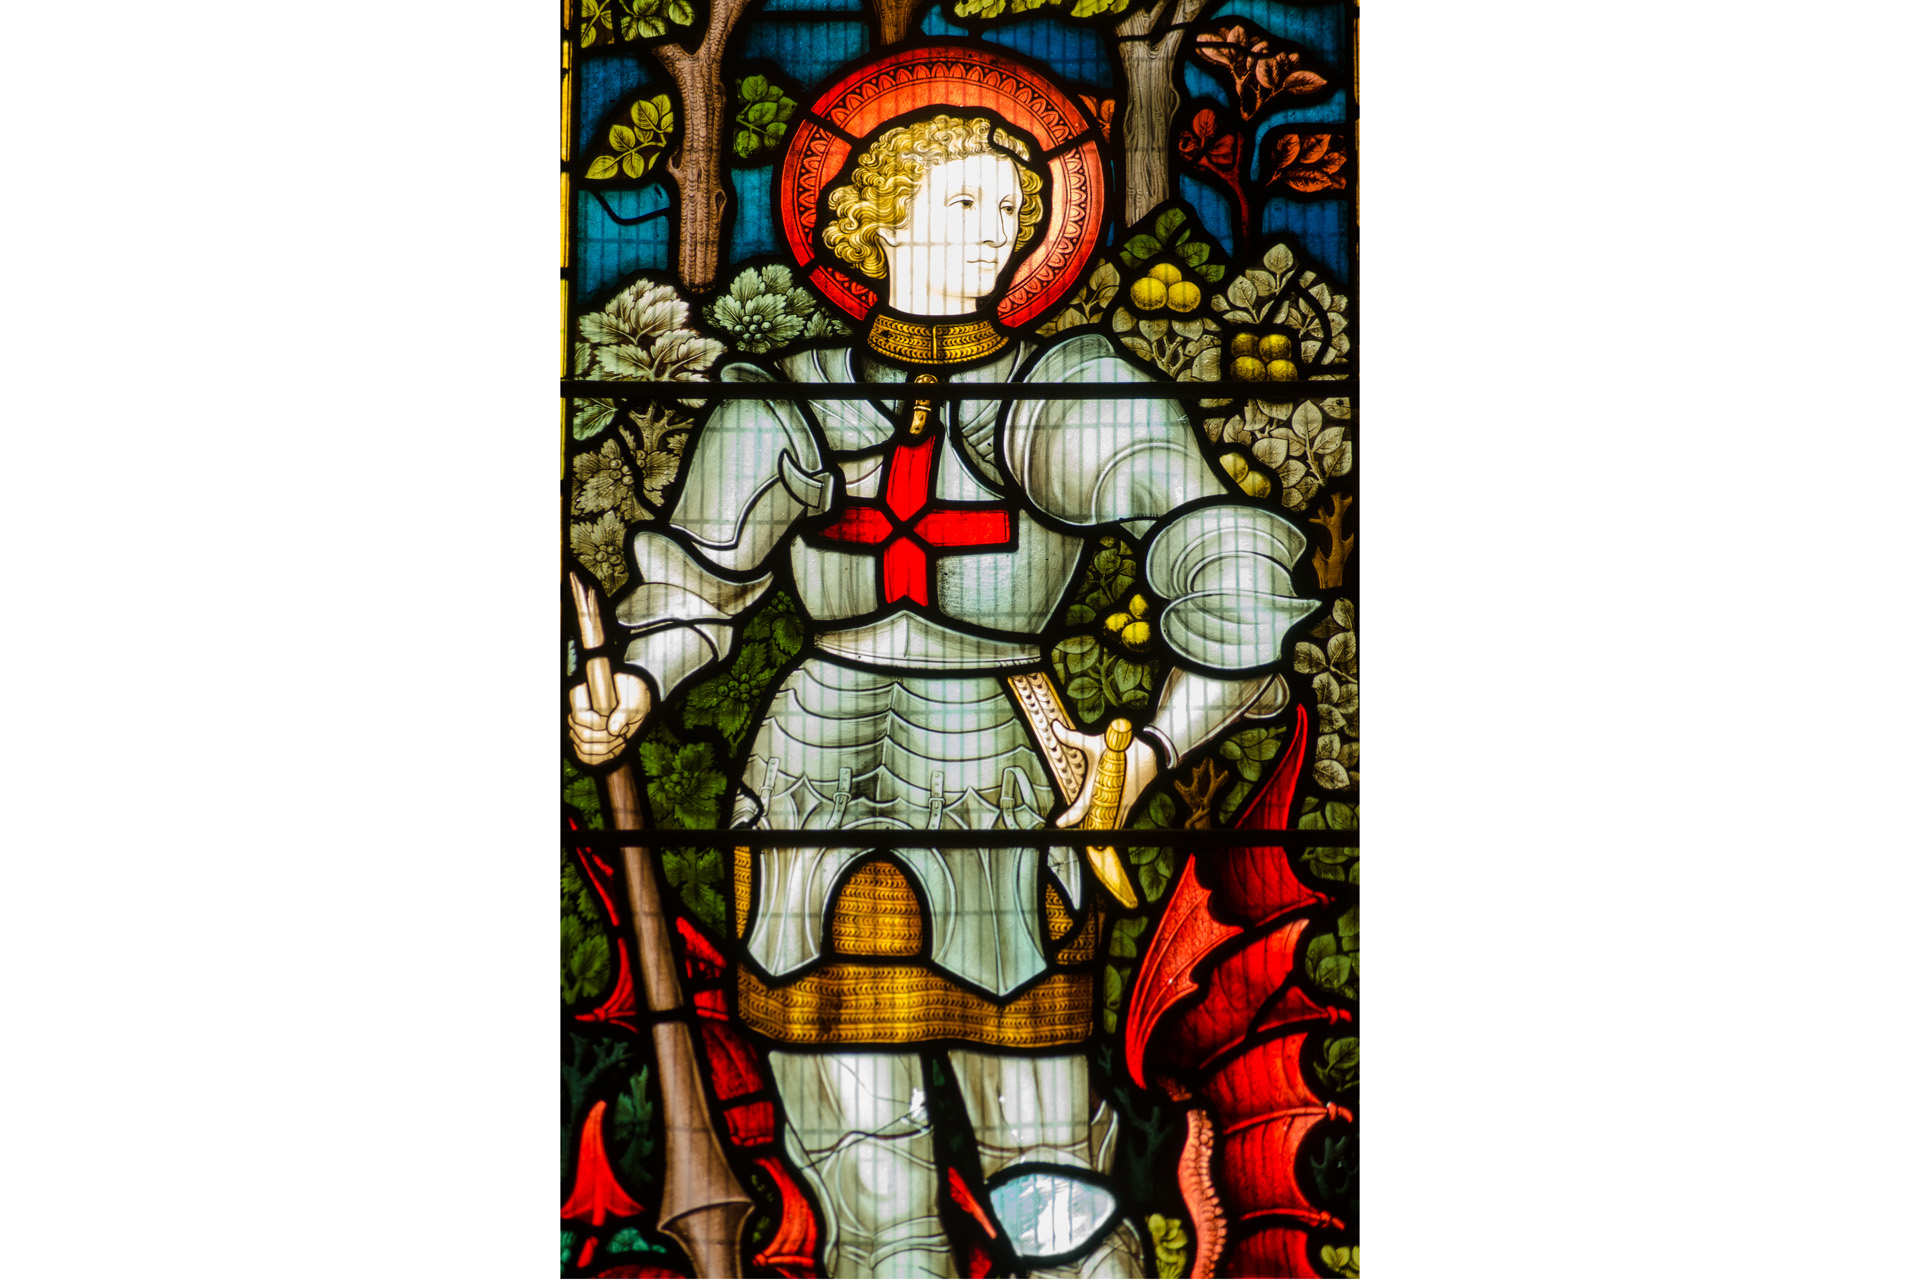 Victorian stained glass window showing Saint George with his defeated dragon.